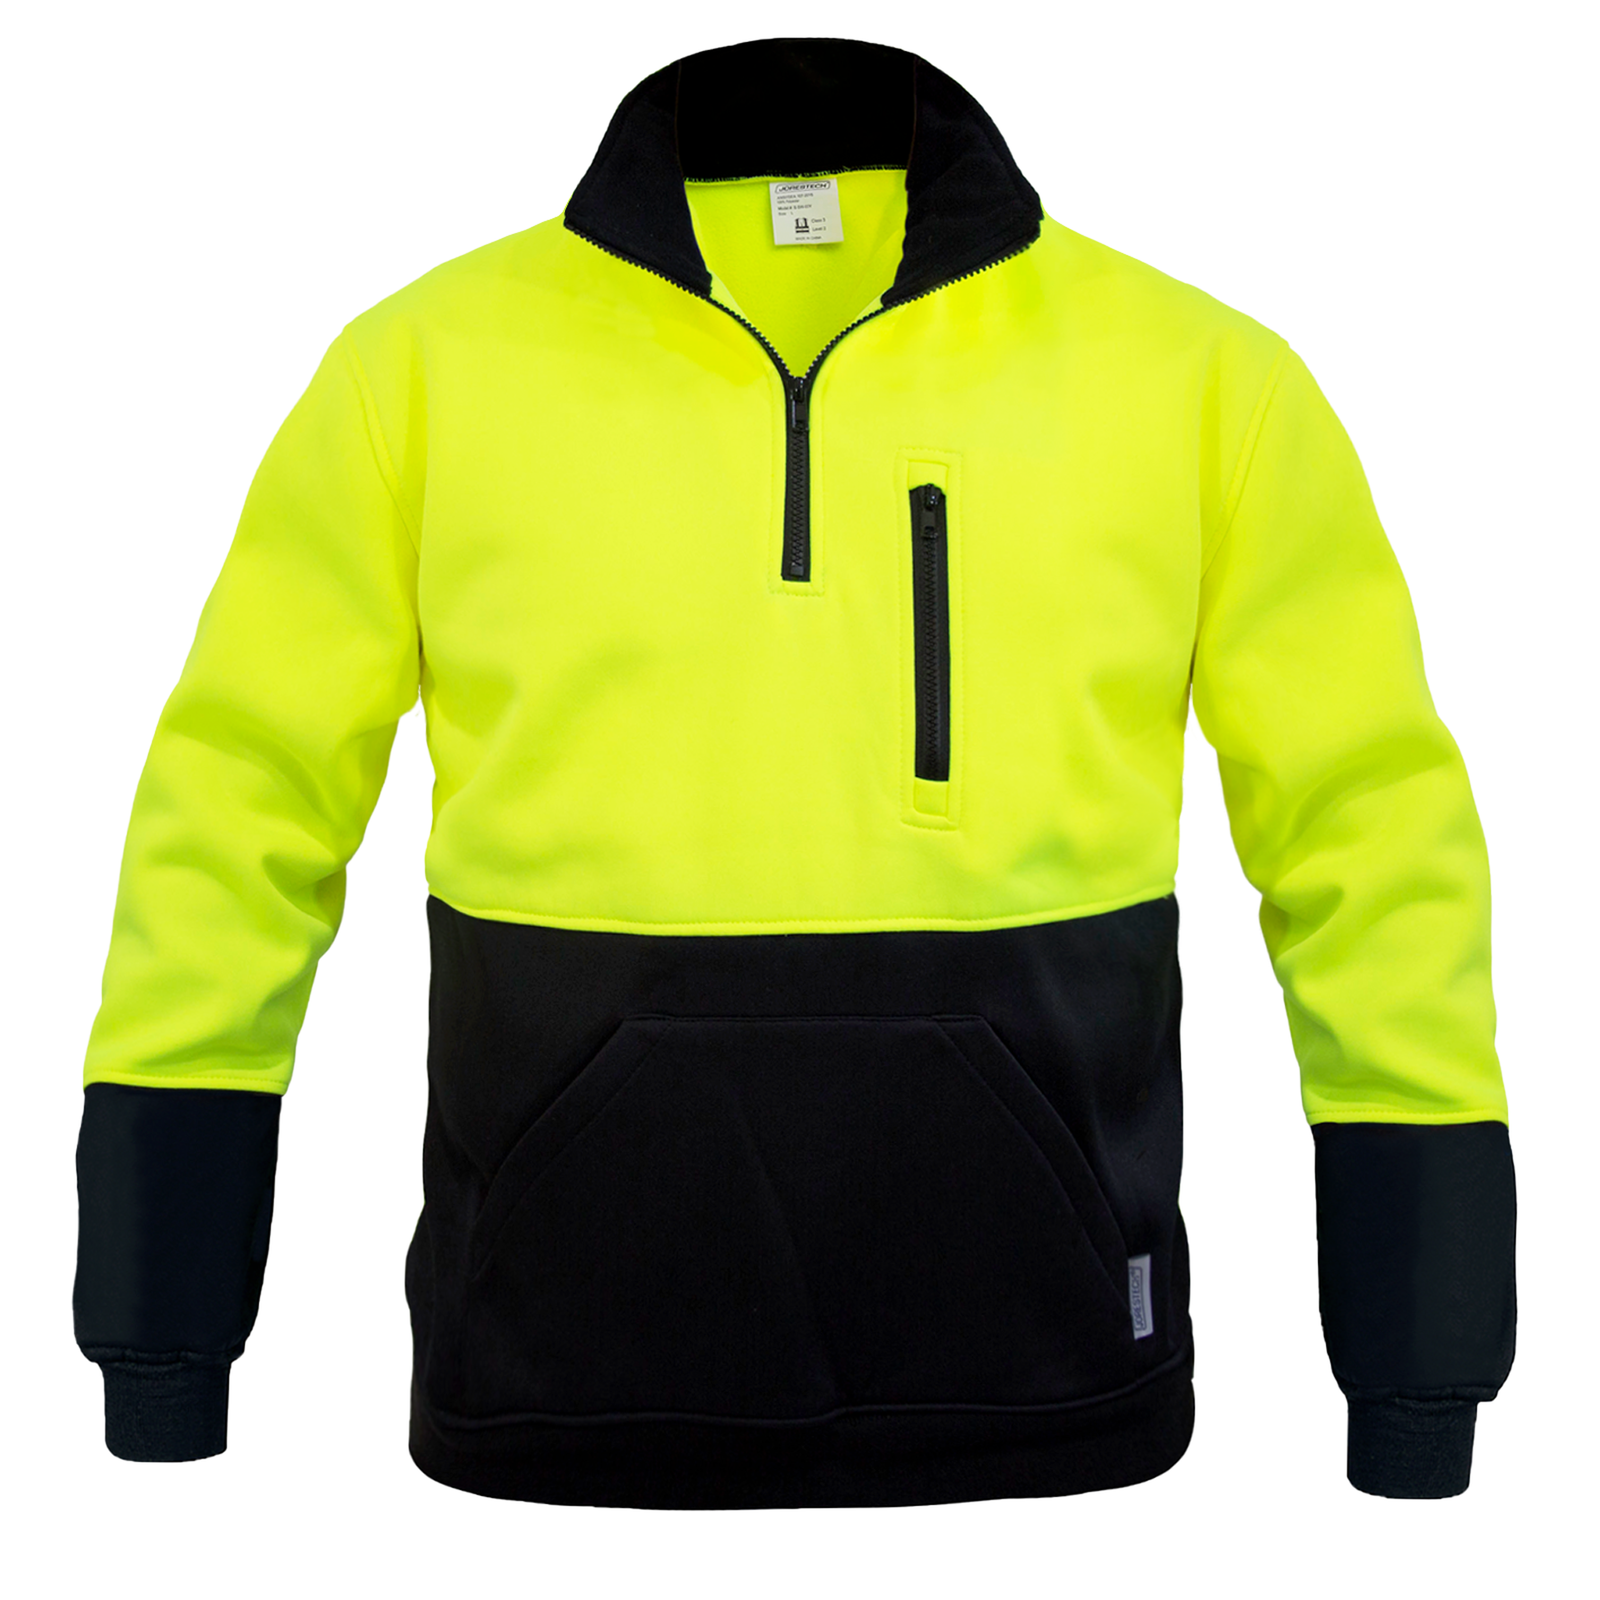 High visibility yellow and black JORESTECH sweatshirt. Sweater has a black stand up collar, half a zipper and a pocket chest that closes with a zipper.